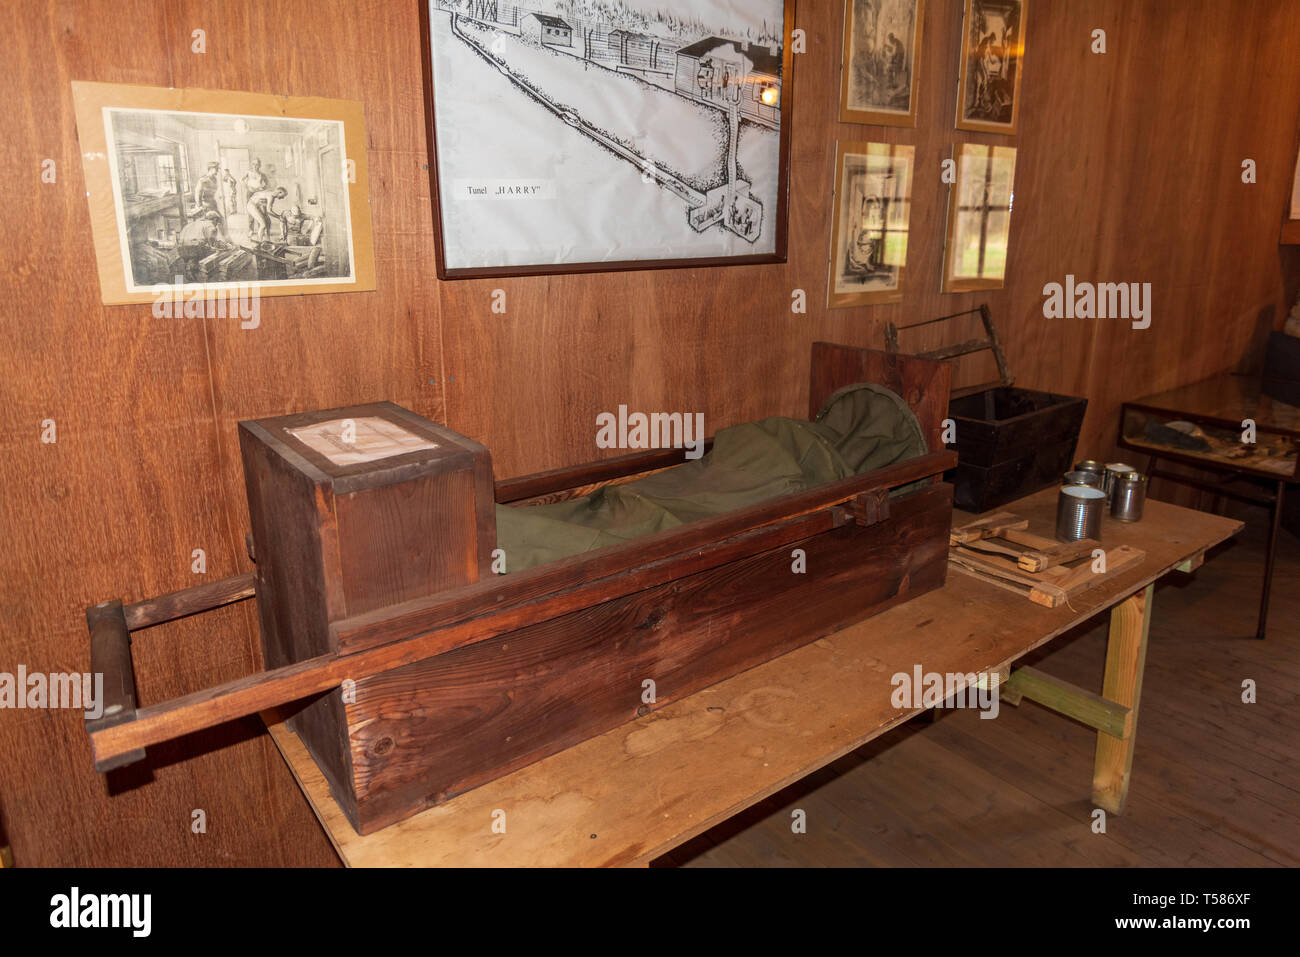 Inside replica of POW hut in Stalag Luft III Great Escape Camp, Zagan, Poland Stock Photo